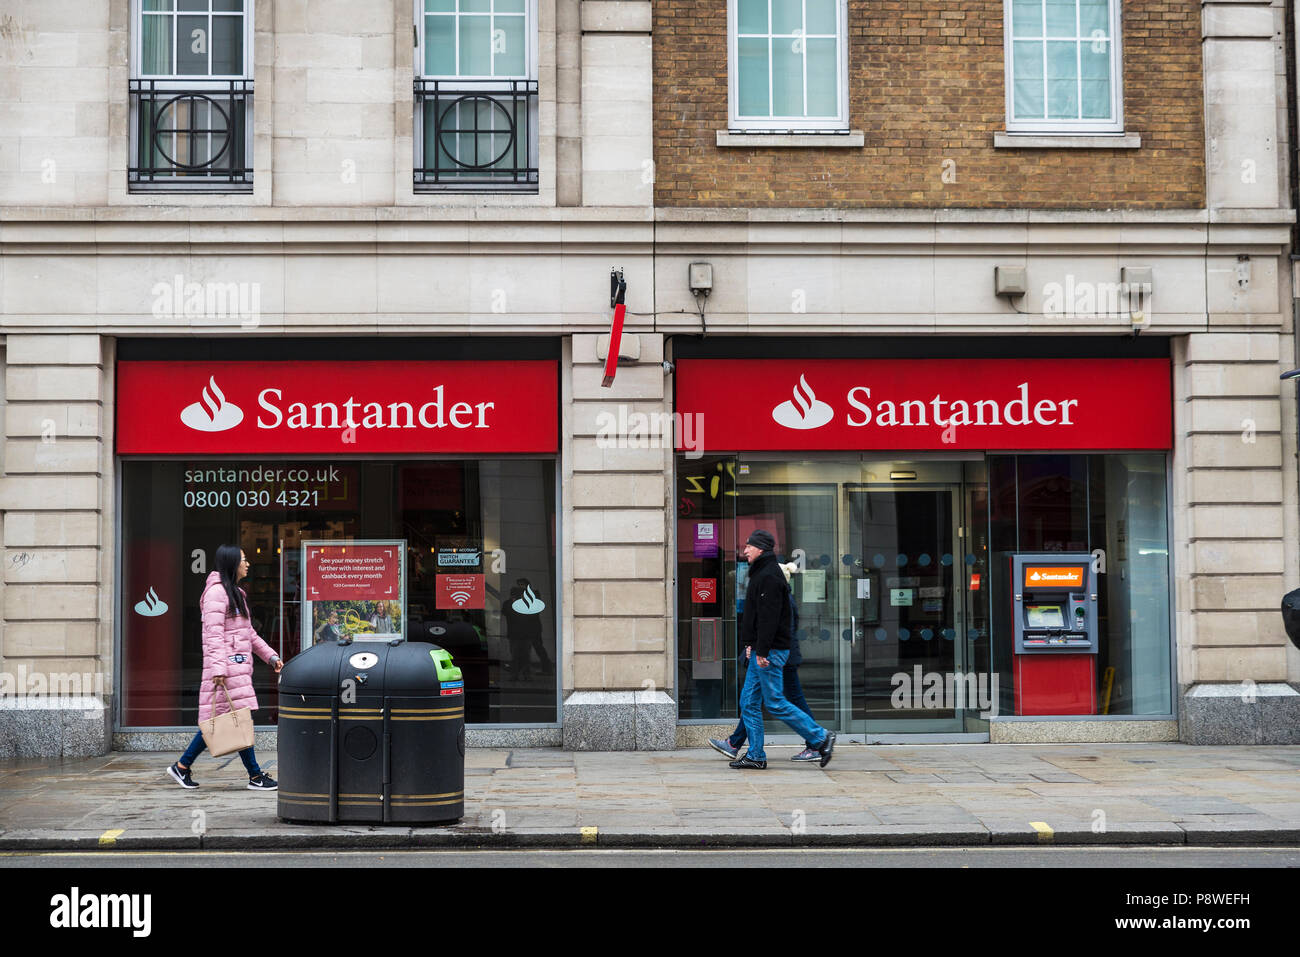 London, United Kingdom - January 1, 2017: Bank branch and ATM of Santander Bank with people around in London, England, United Kingdom Stock Photo